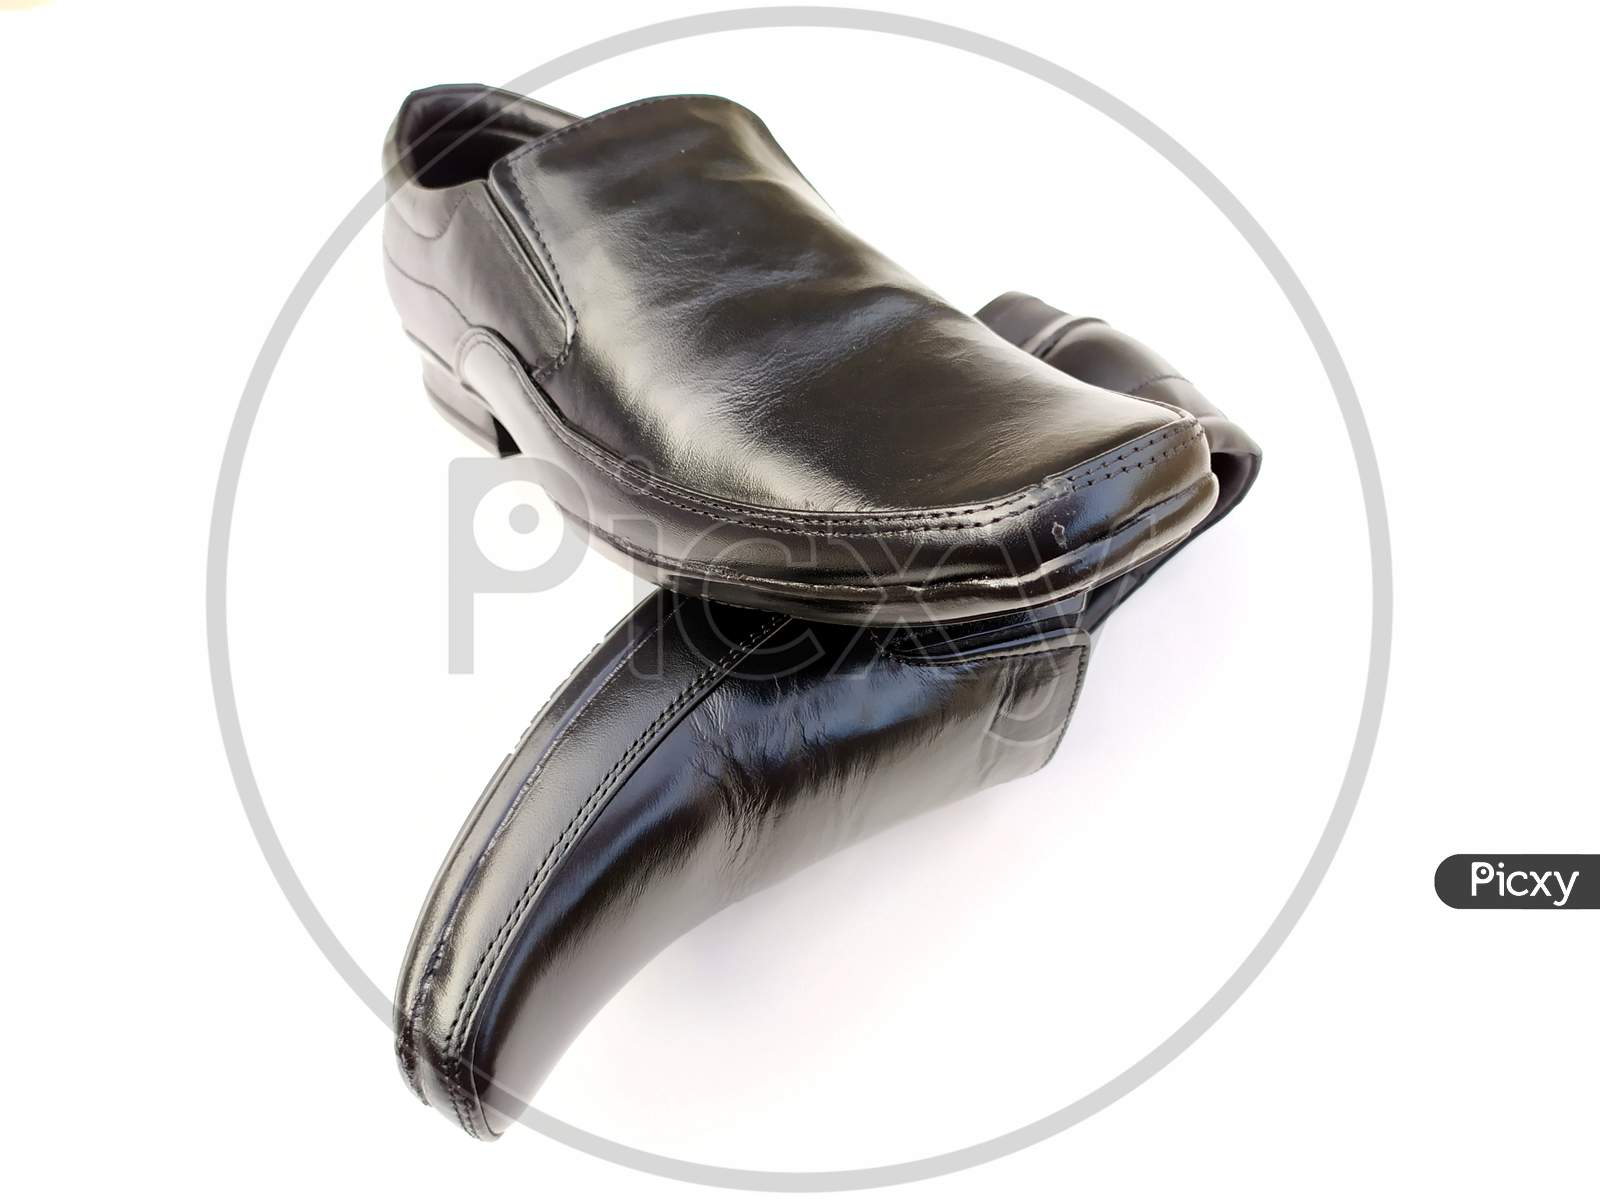 black mans leather shoes isolated on white background